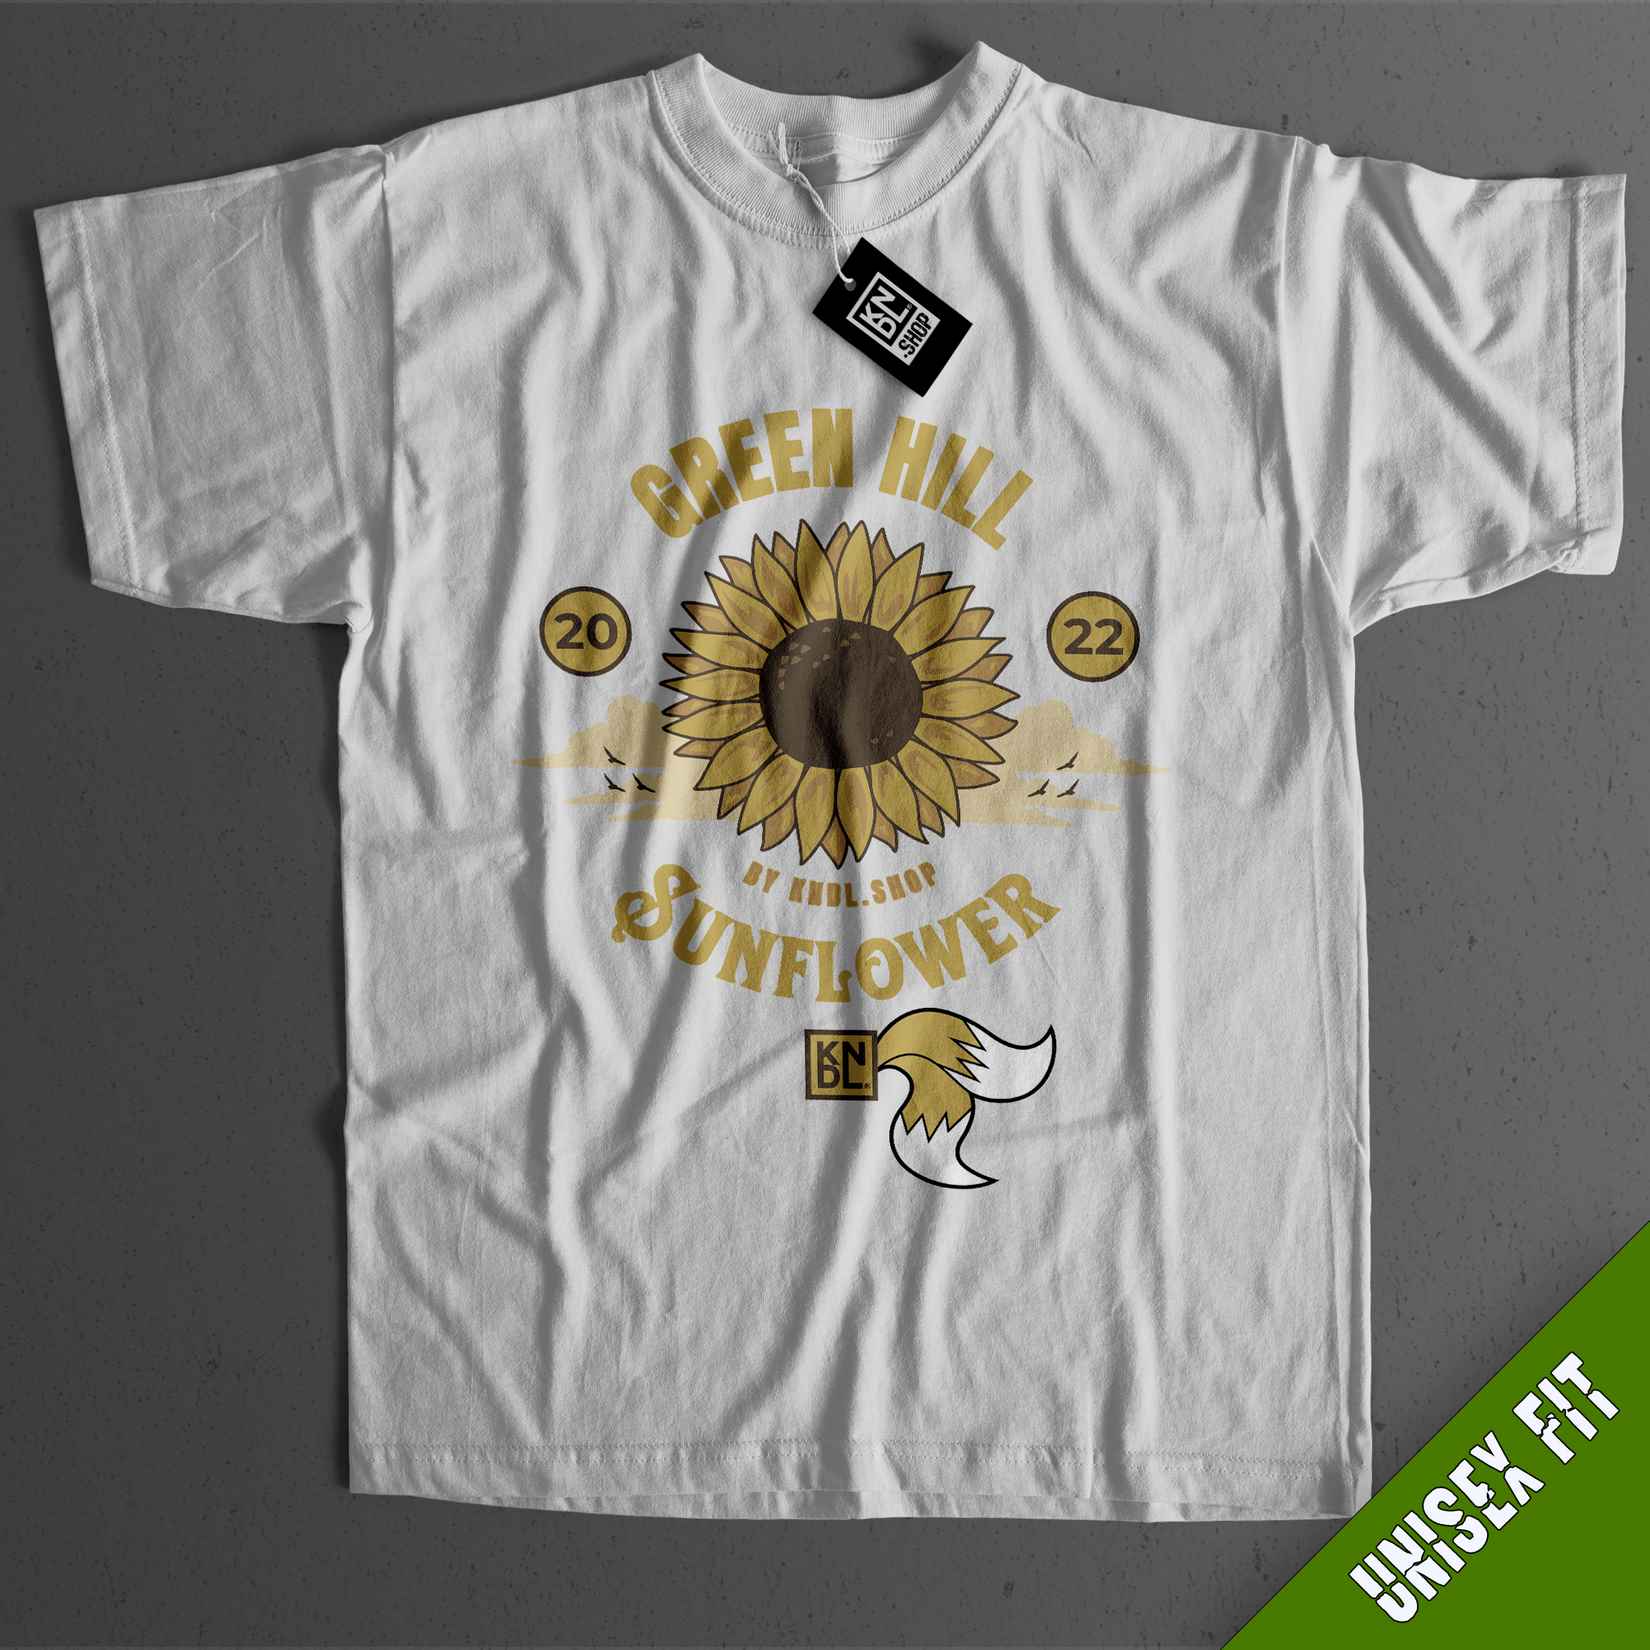 a white t - shirt with a sunflower on it